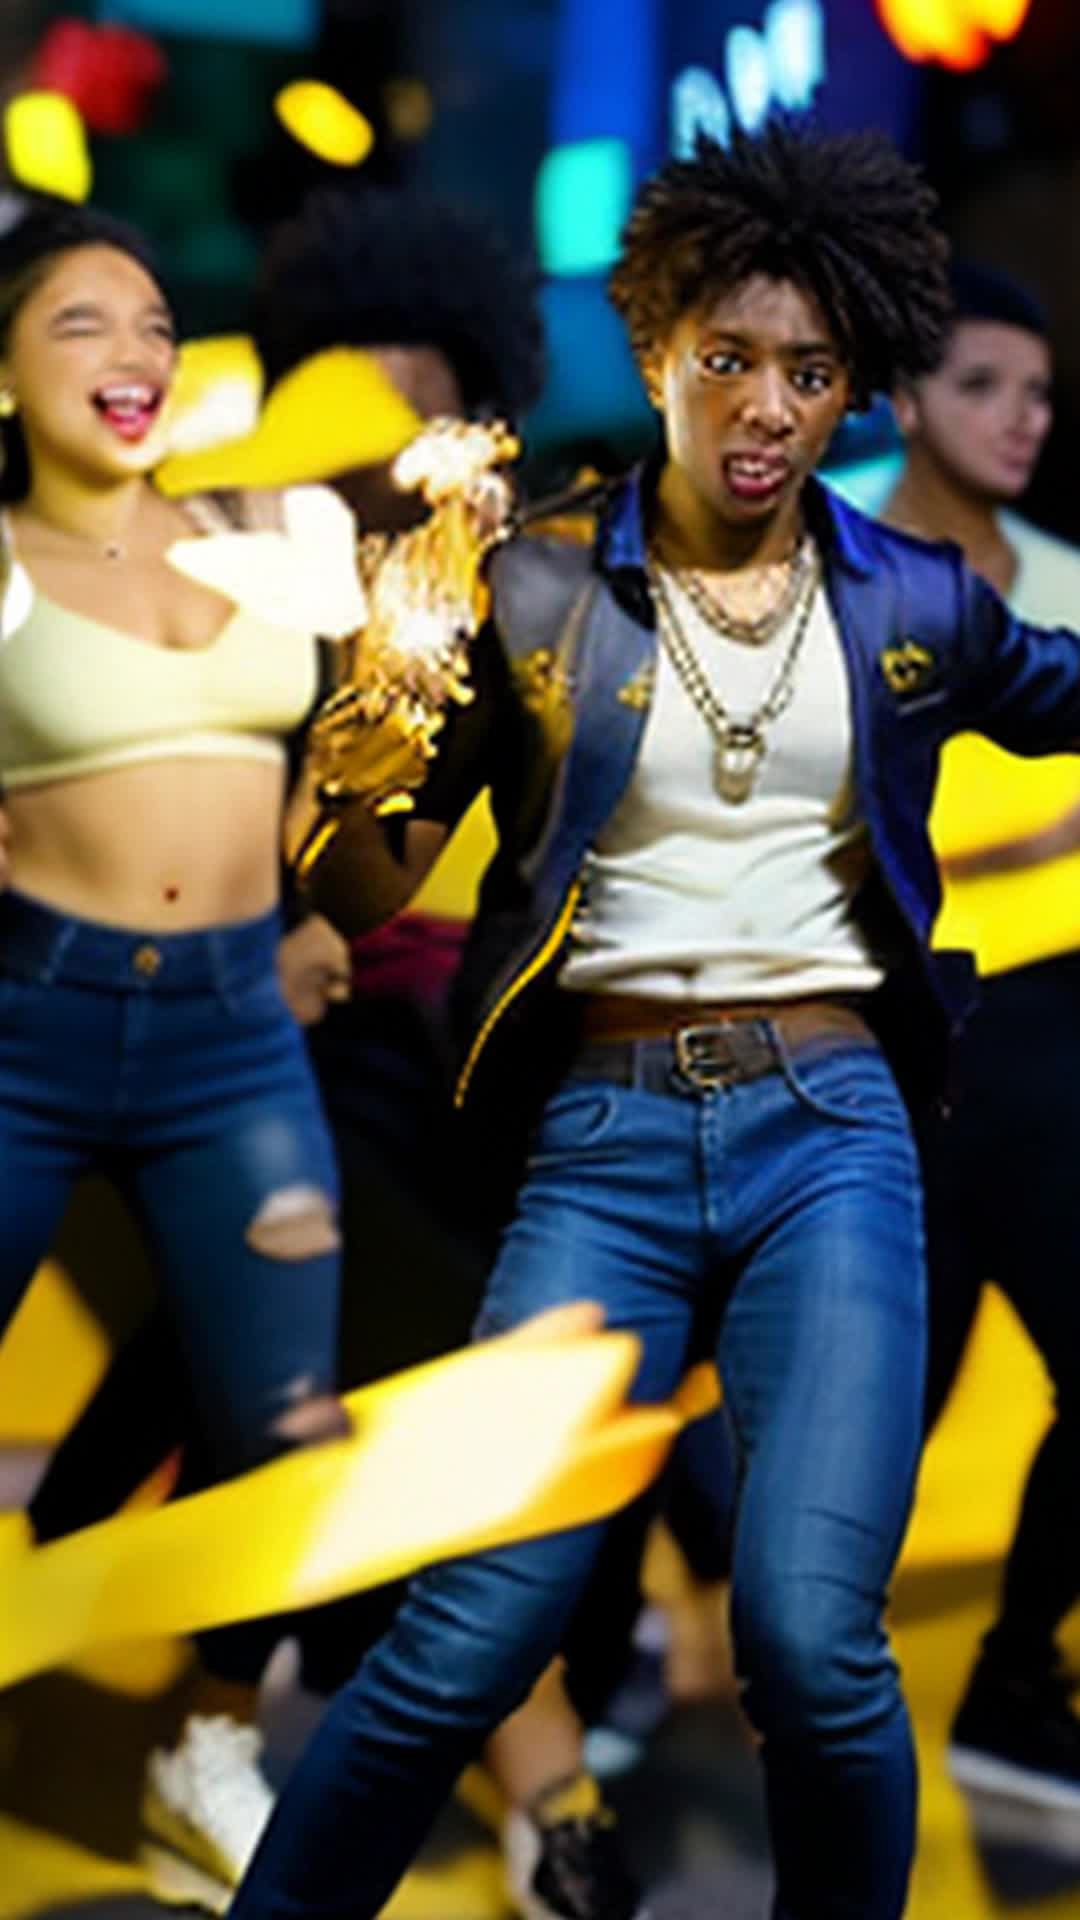 Group of friends dancing, lively atmosphere, swaying to music, joyful expressions, seamless movements, smooth choreography, vibrant background, smoke swirling from cigarettes, soft shadows, closeup and wideangle shots, cinematic effect, vibrant colors, party lights flashing, dynamic angles, high energy, festive ambiance, rendered by octane